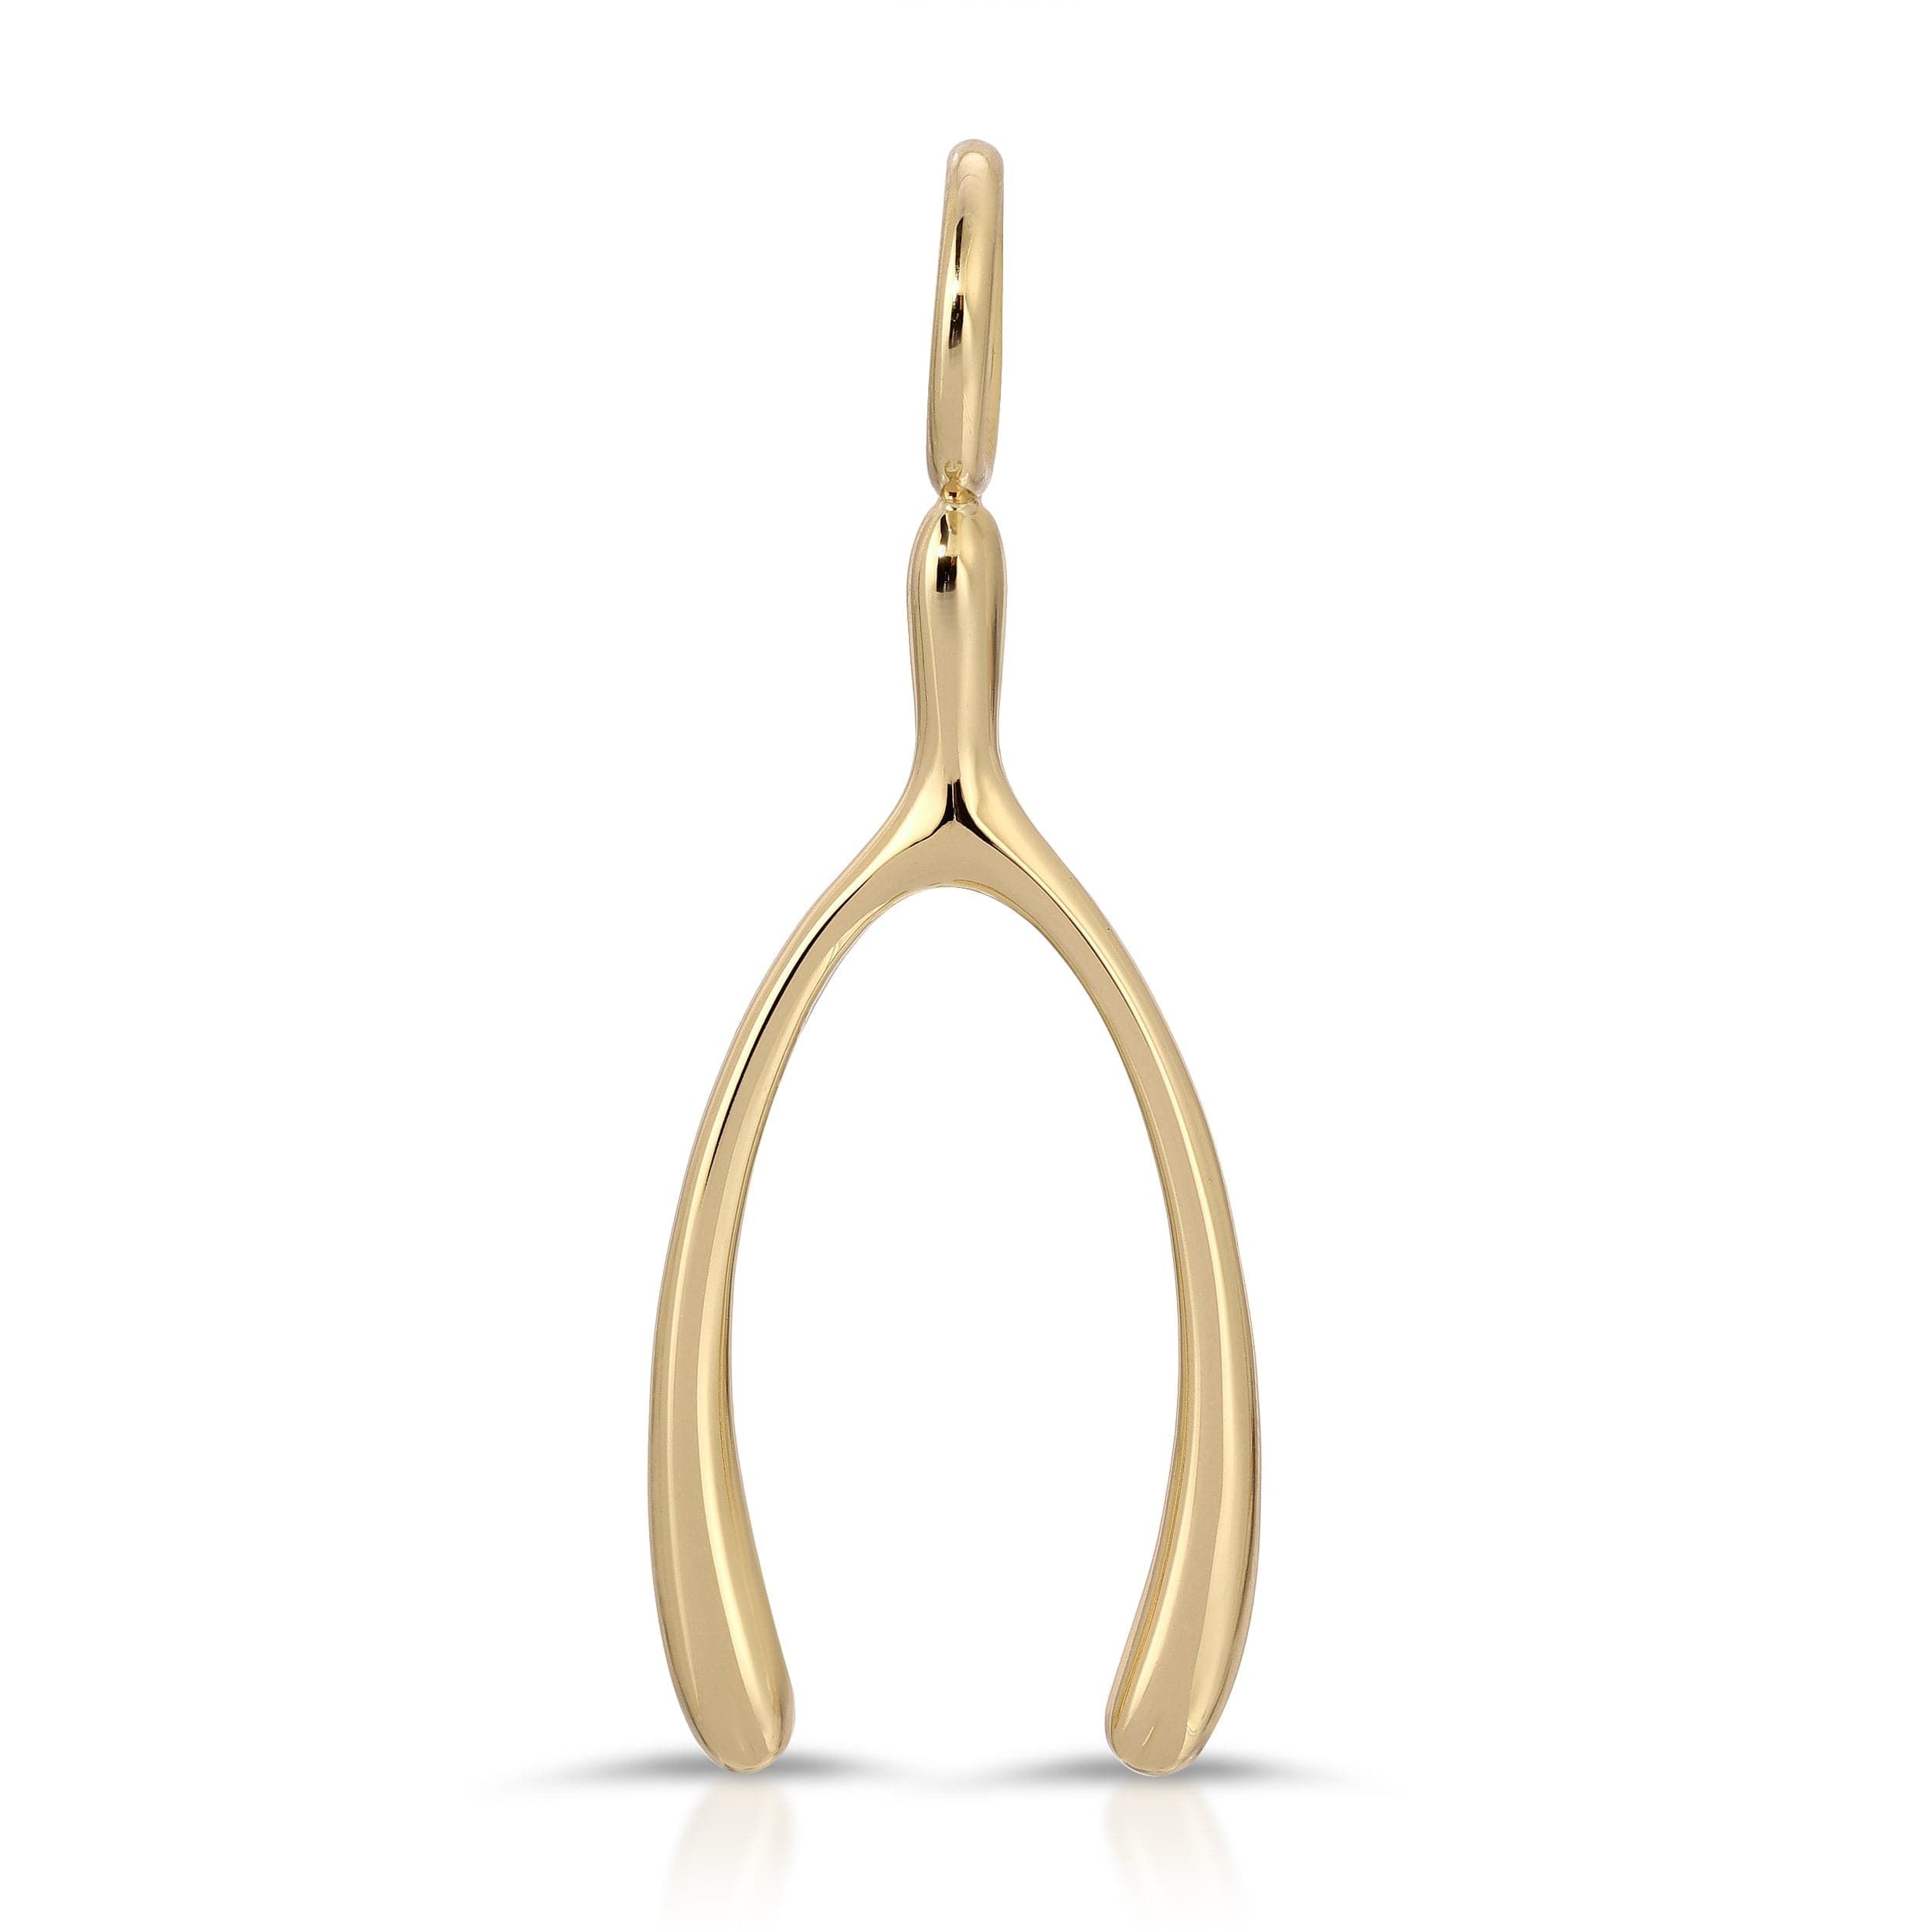 a pair of gold scissors on a white background